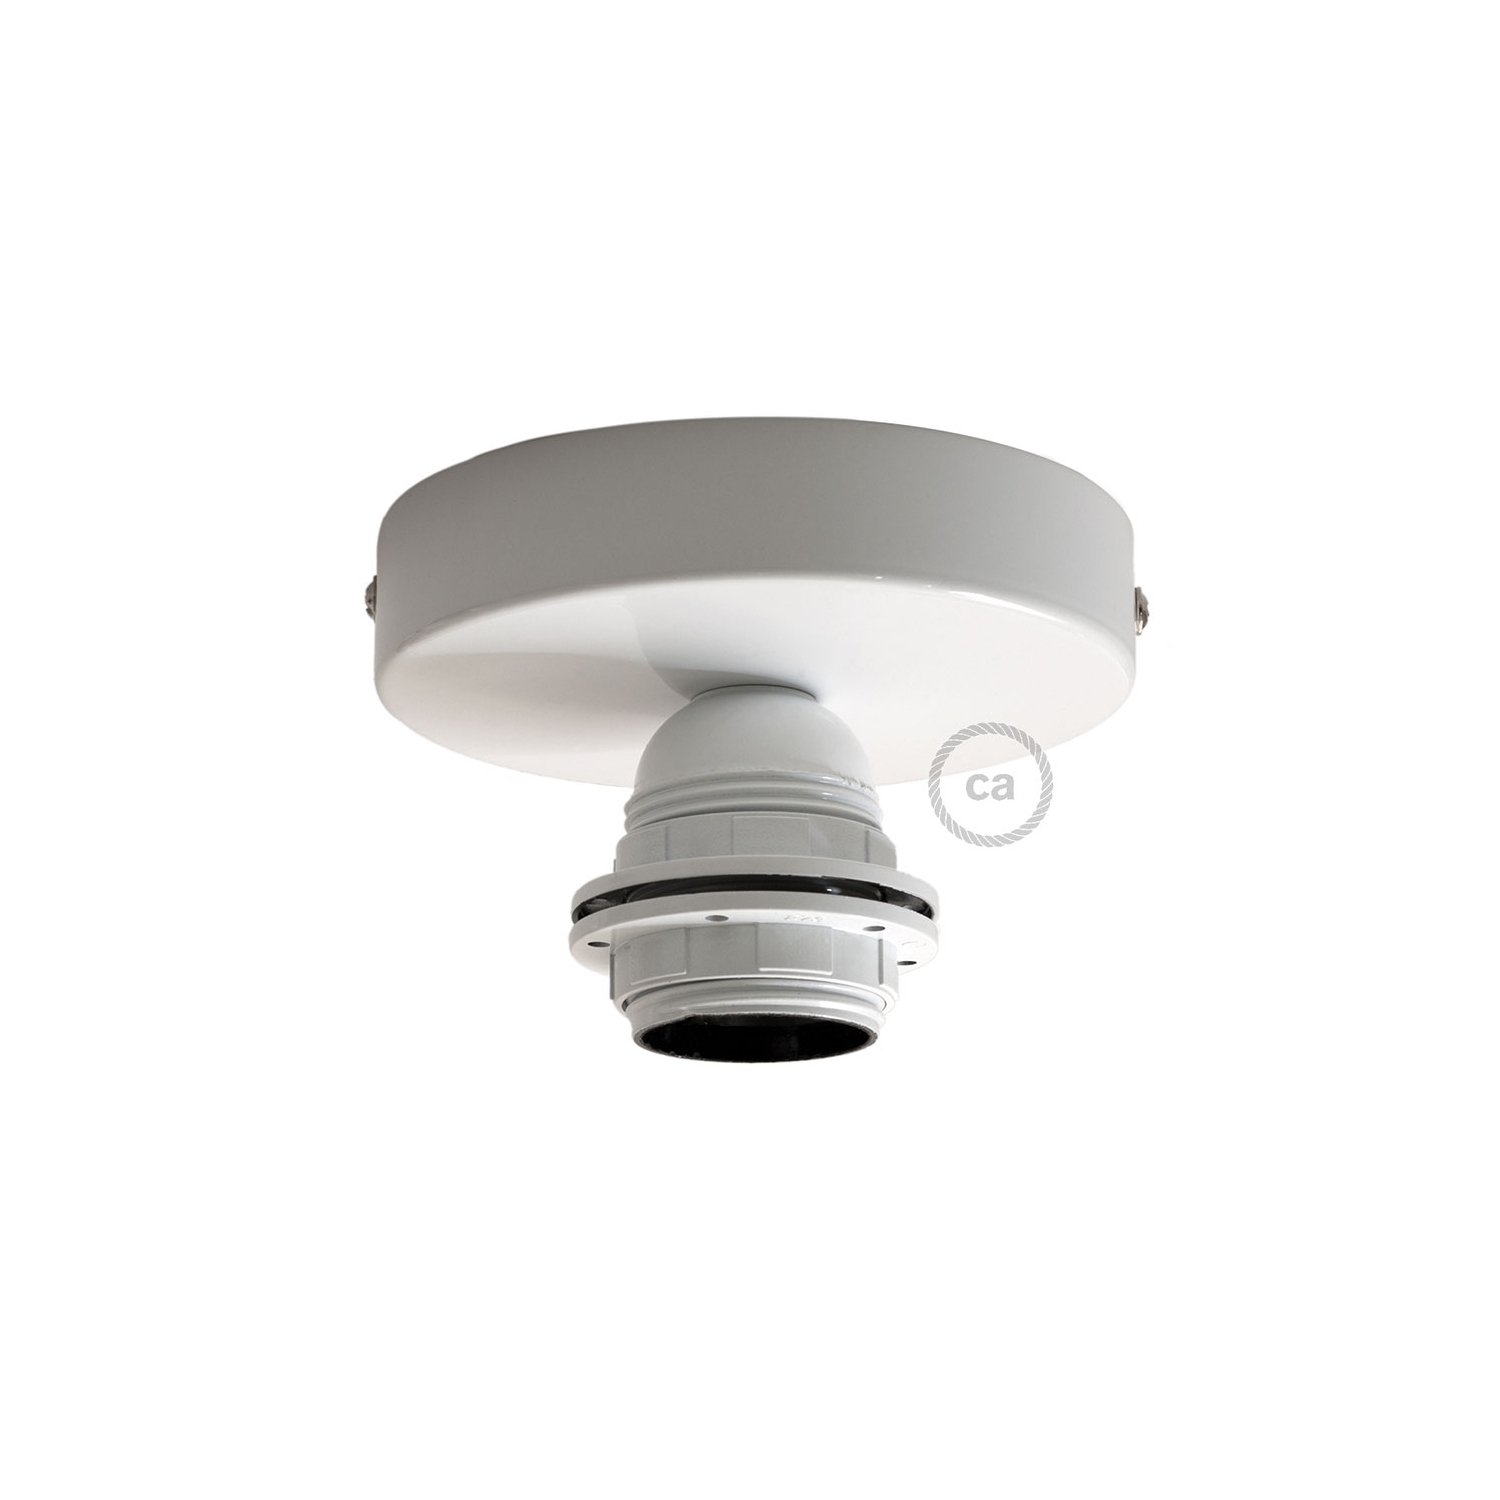 Fermaluce White metal, with E26 threaded lamp holder, the metal wall or ceiling light source